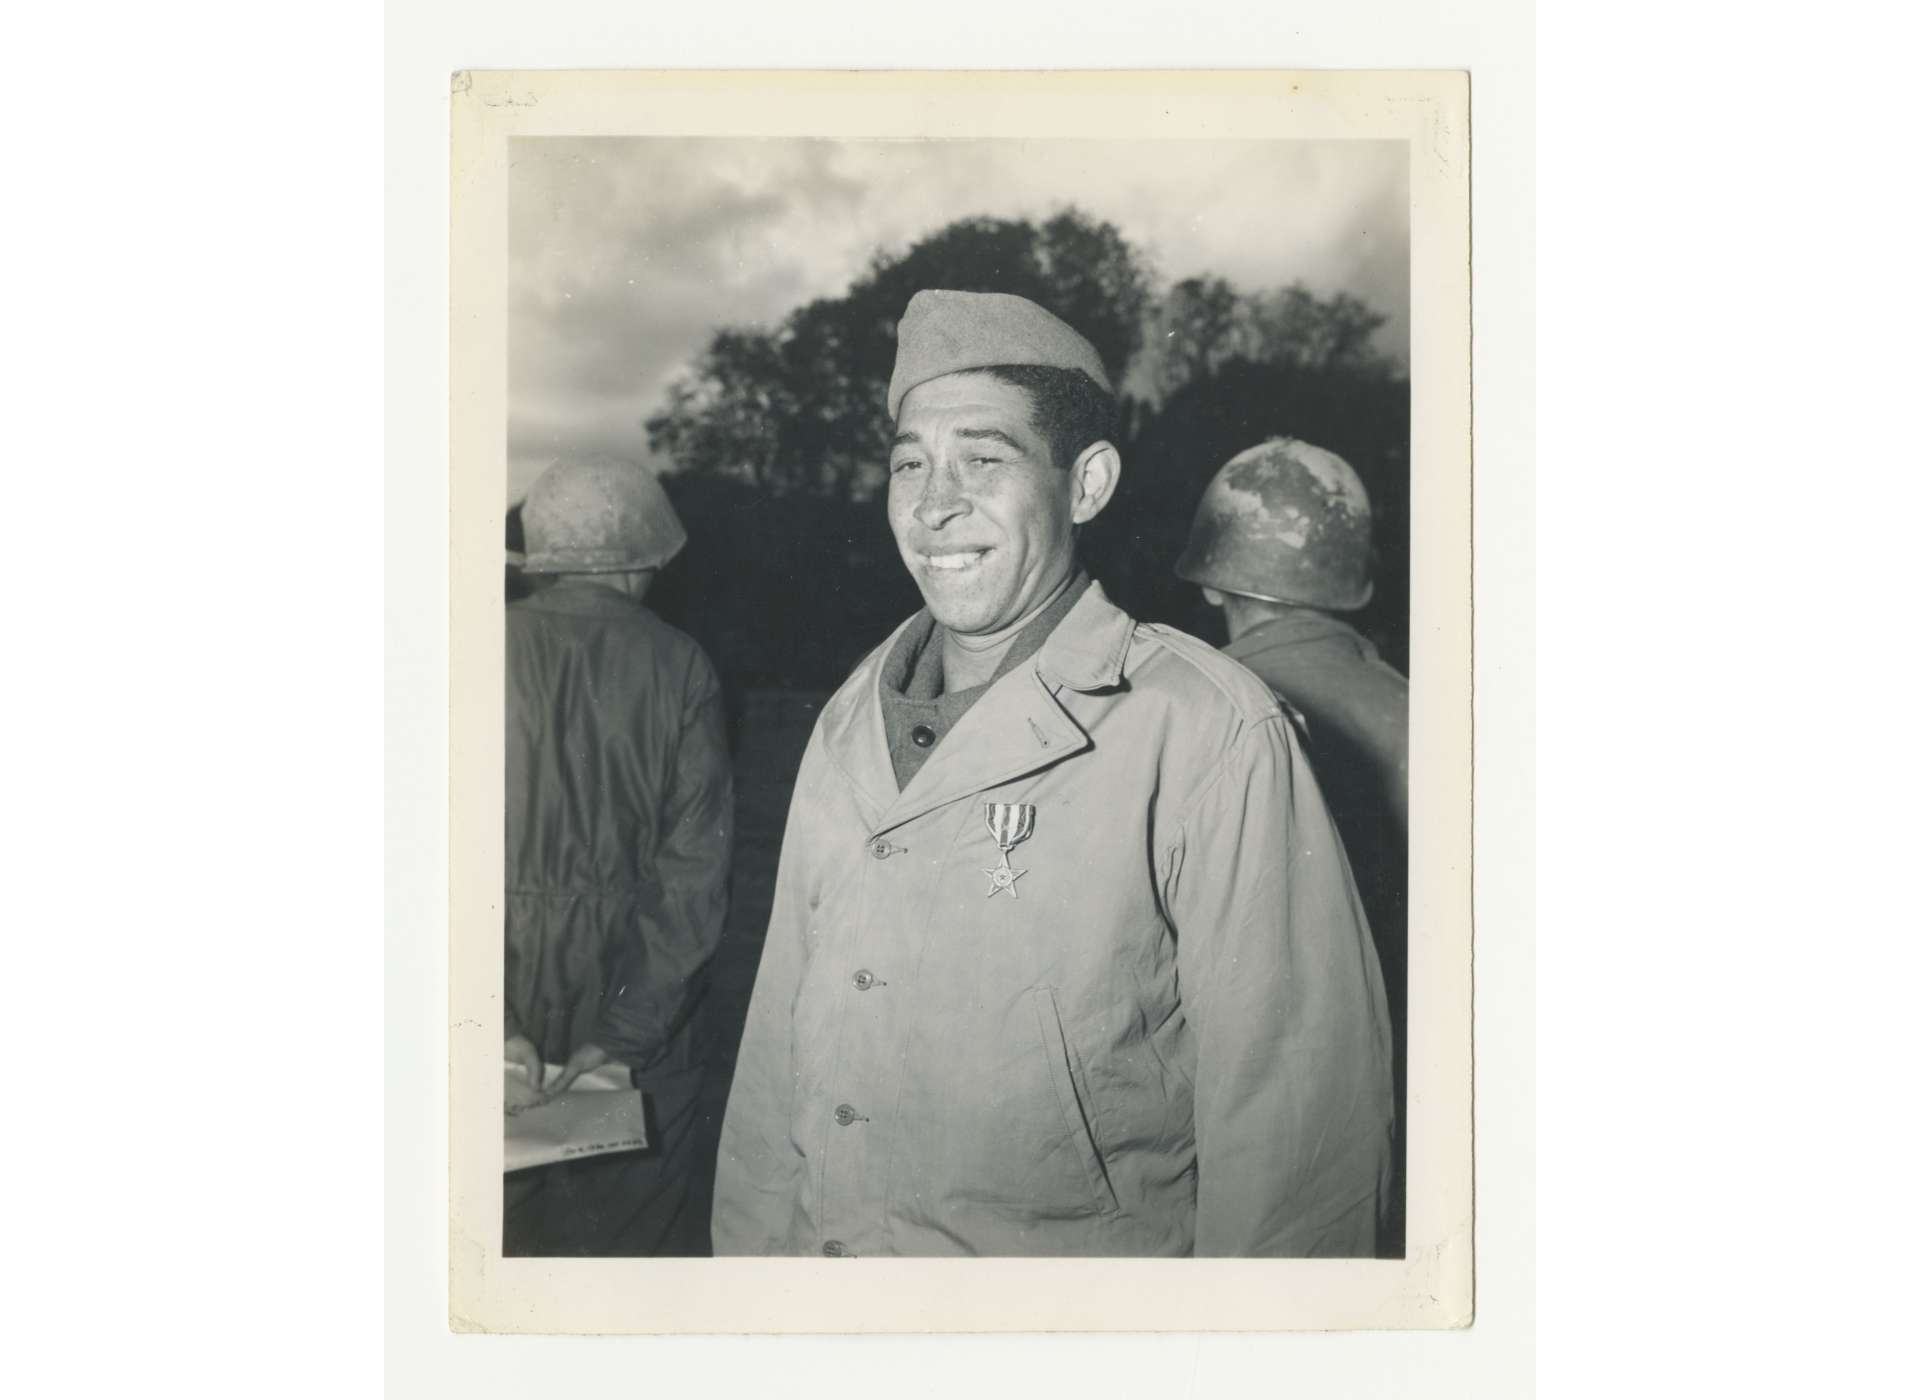 Marcilio Juiz Pinto, a member of the Brazilian Expeditionary Force from Sao Paulo, Brazil, after he received the Silver Star from Lt. General Mark Clark, commander of US Fifth Army, November 16, 1944. US Army Signal Corps photograph, gift in memory of William F. Cadddell, Sr., from the Collection of The National WWII Museum, 2007.048.480.